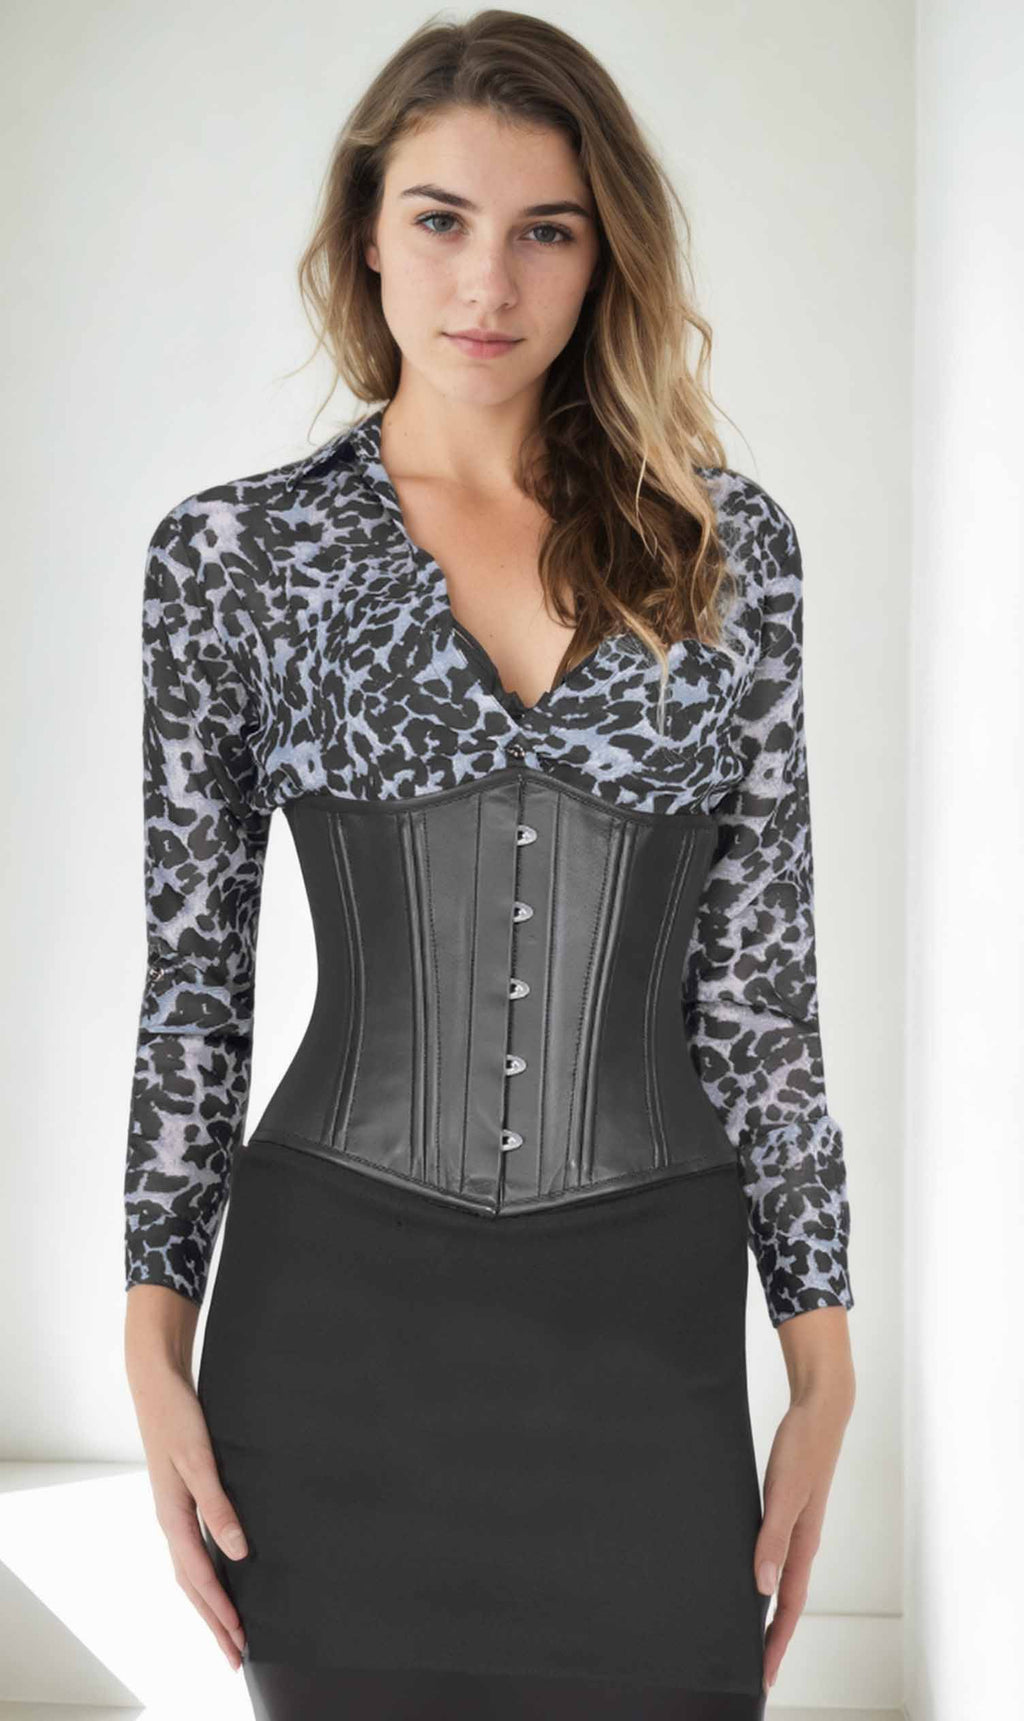 10 Best Corset To Lose Belly Fats of 2023 – Bunny Corset